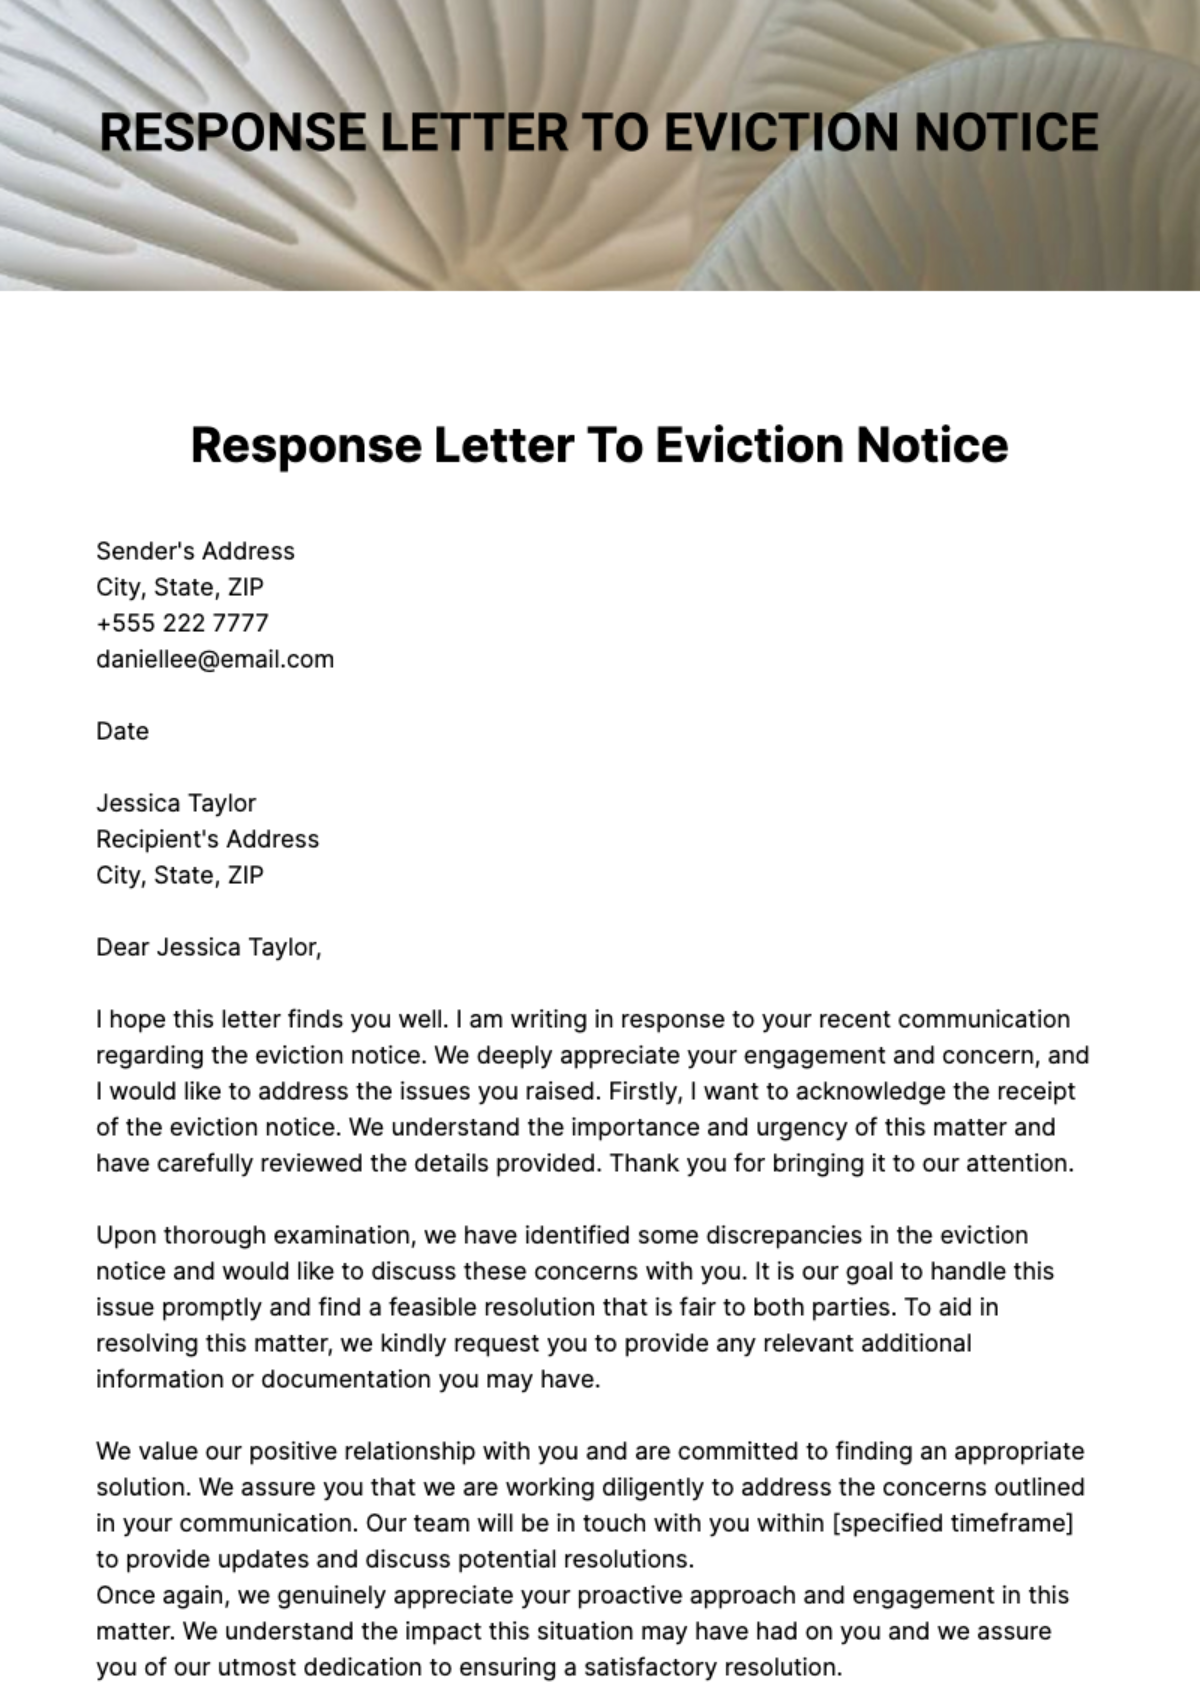 Free Response Letter To Eviction Notice Template